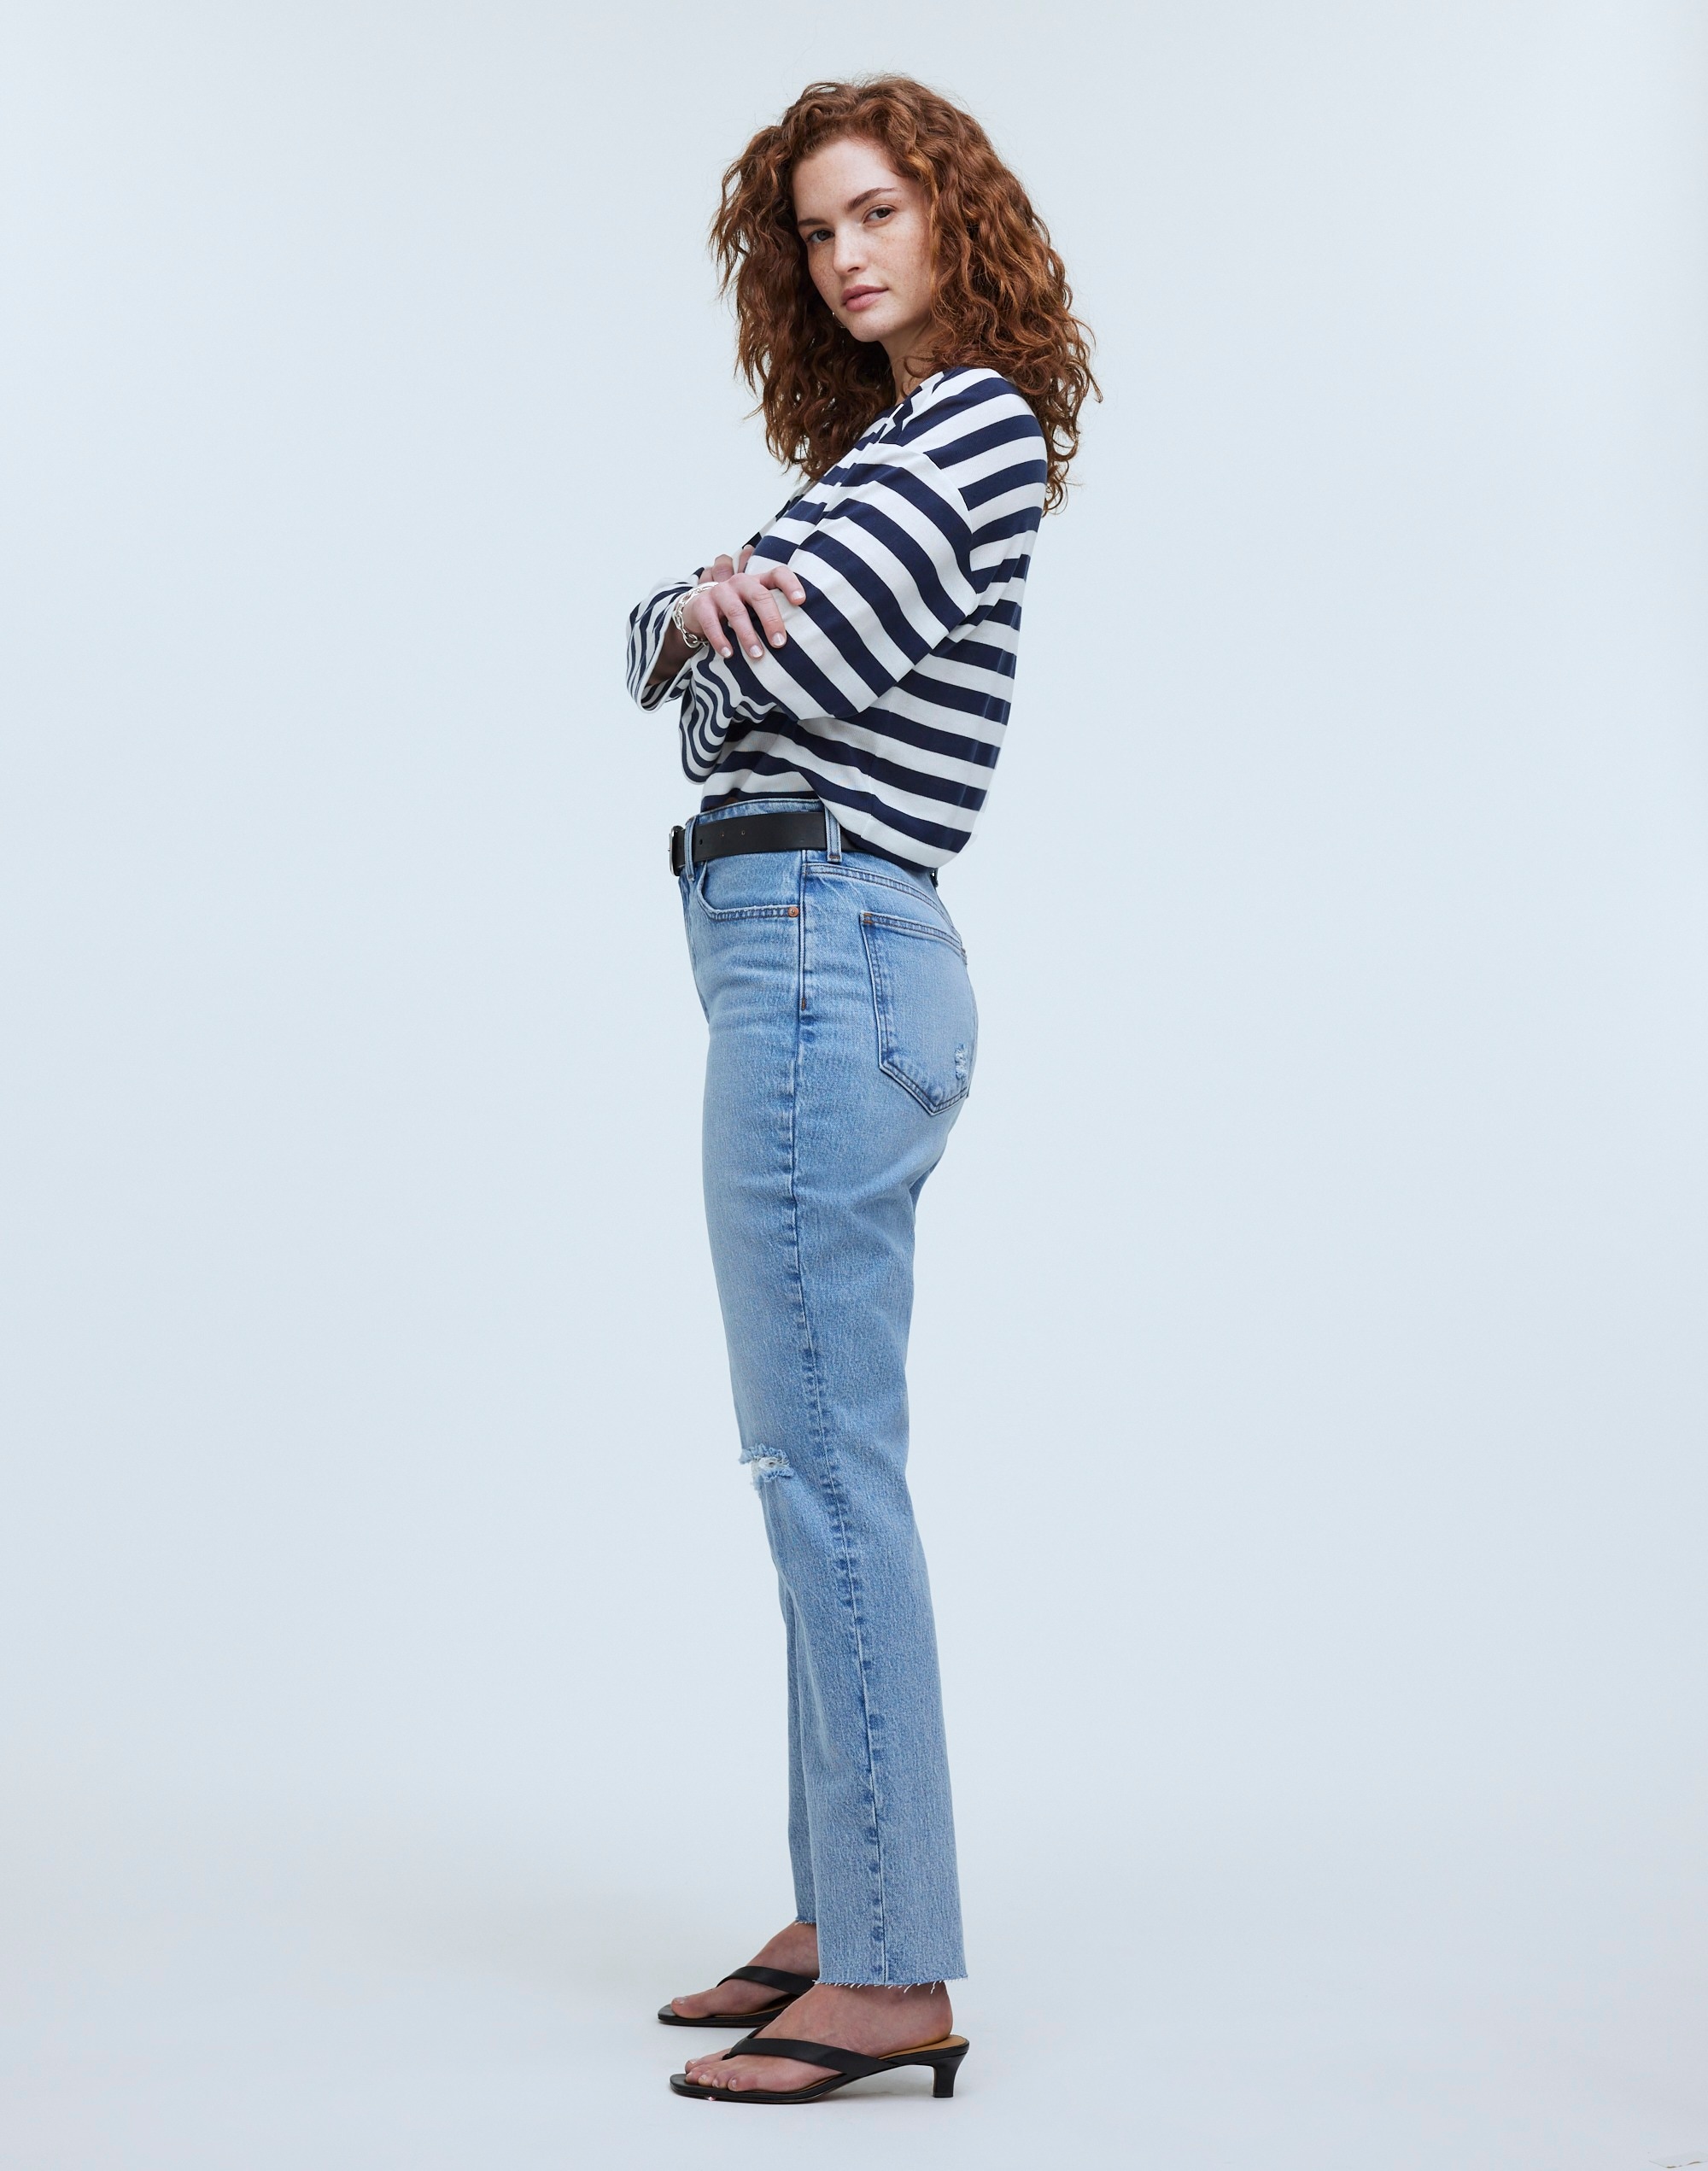 The Petite Curvy Perfect Vintage Jean Charnley Wash